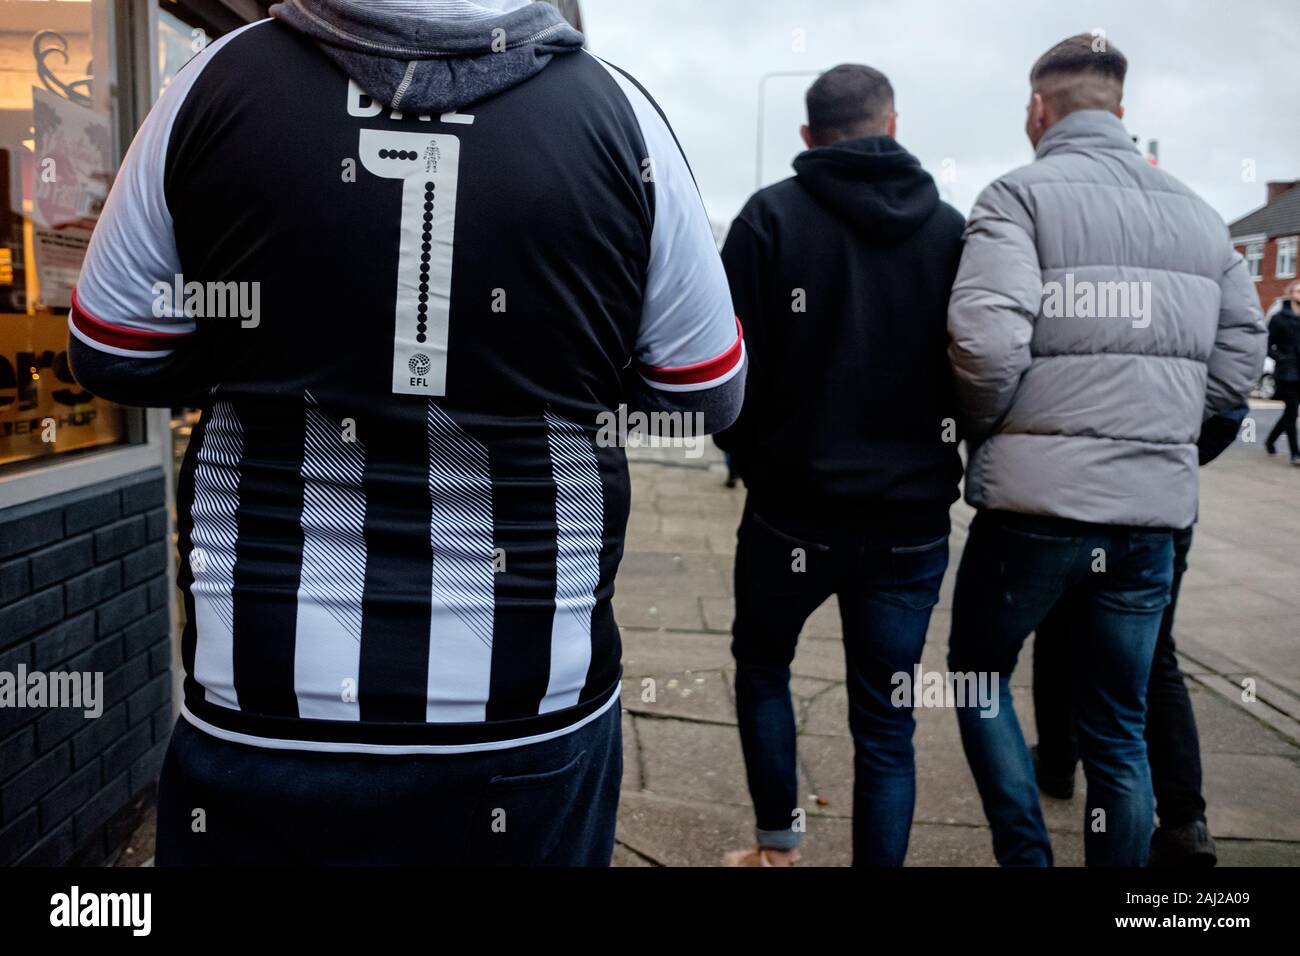 Grimsby Town football fans leaving Blundell Park stadium in Cleethorpes, UK, following the League two match against Scunthorpe United in December 2019 Stock Photo